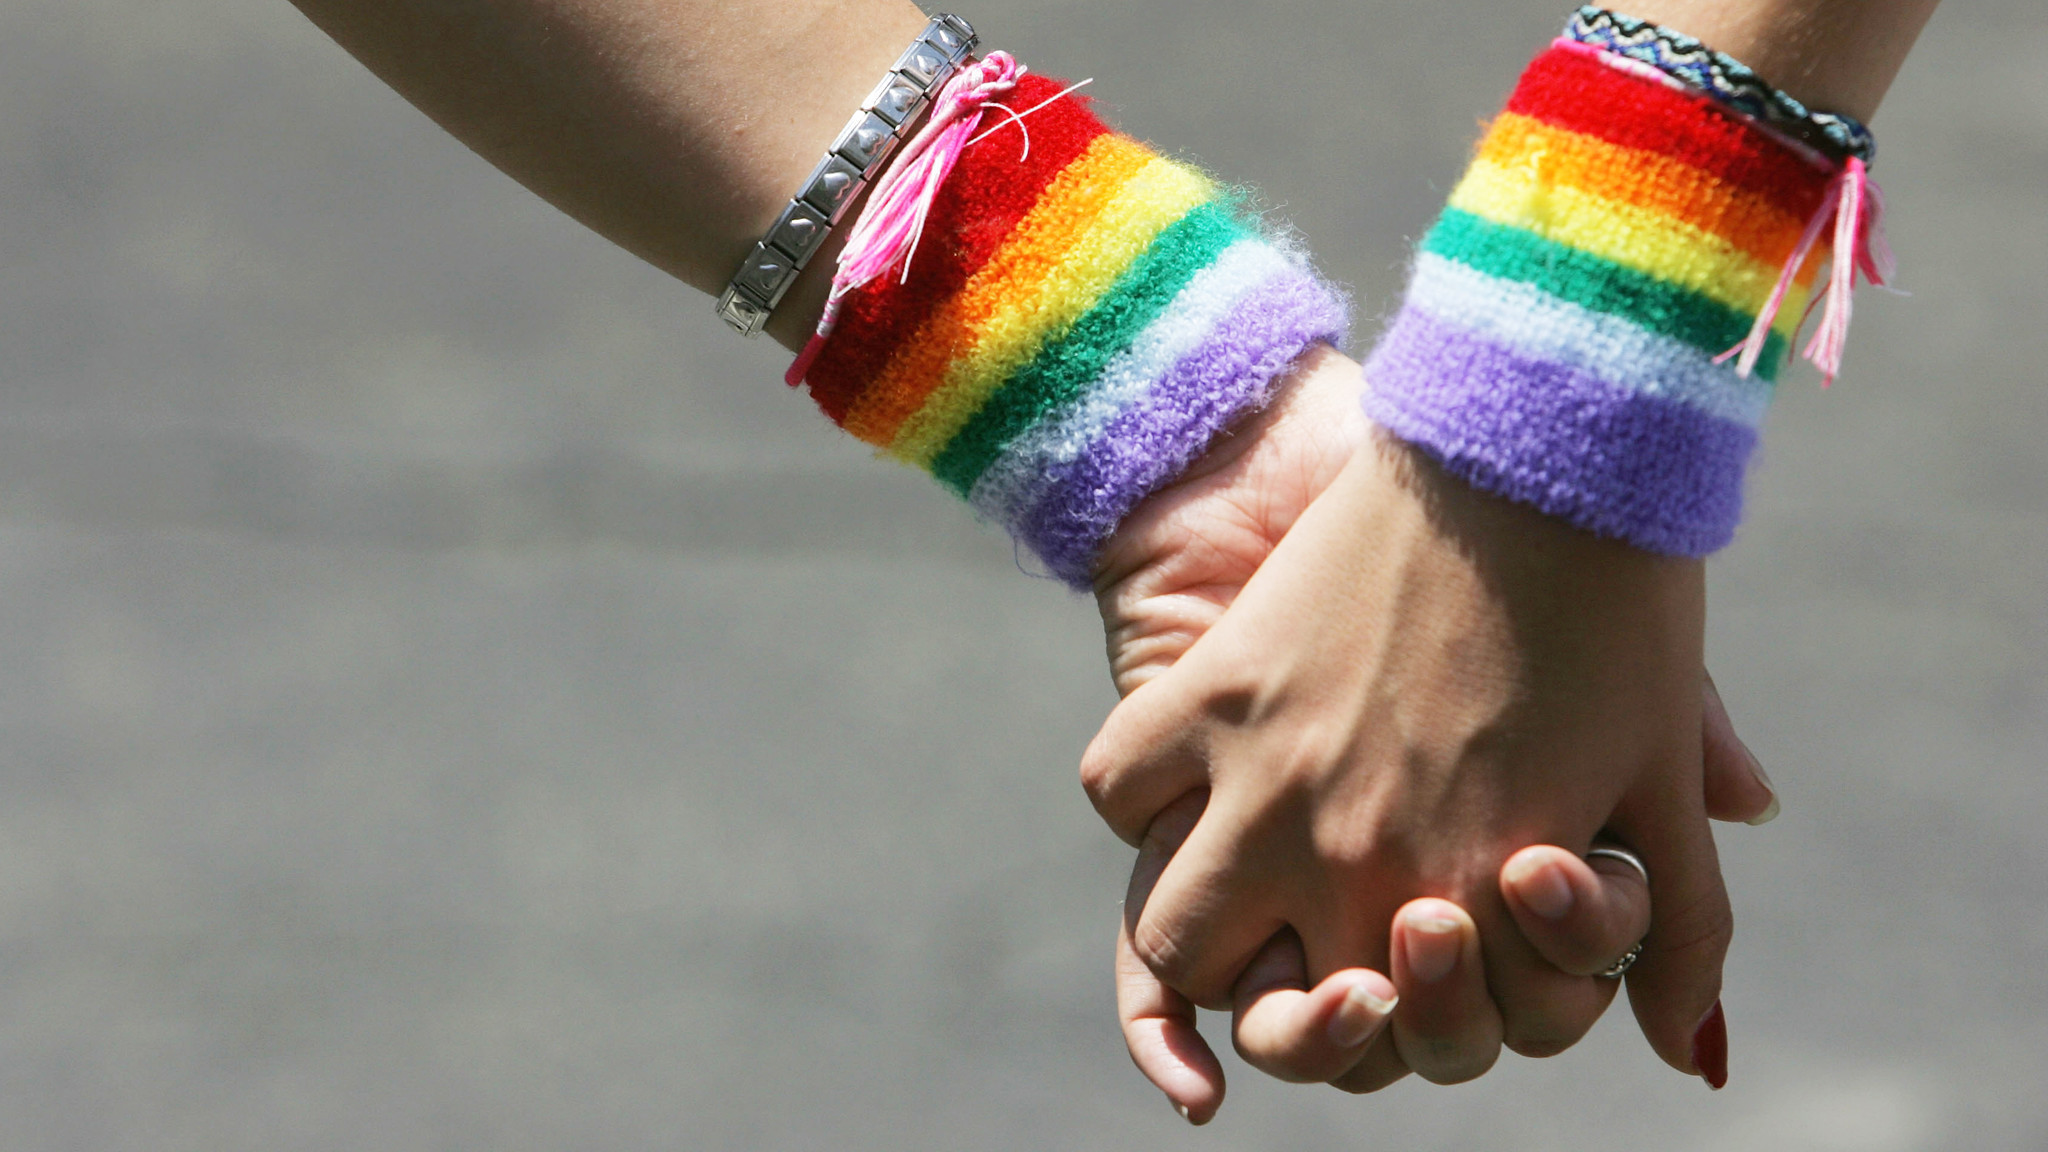 In LGBT community, bisexual people have more health risks. Here's what ...